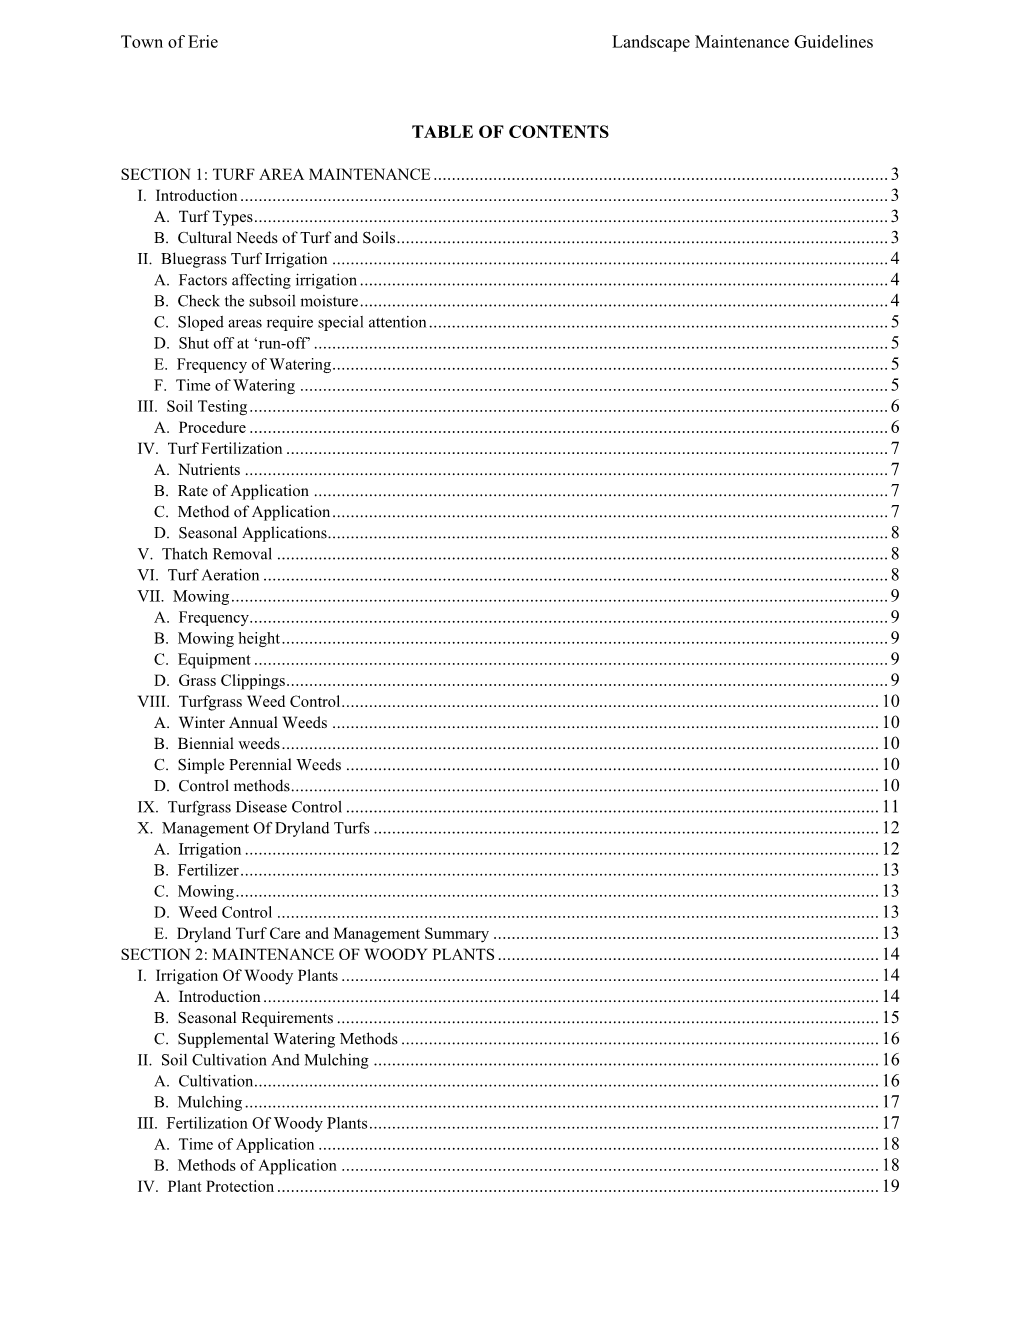 Town of Erie Landscape Maintenance Guidelines TABLE of CONTENTS